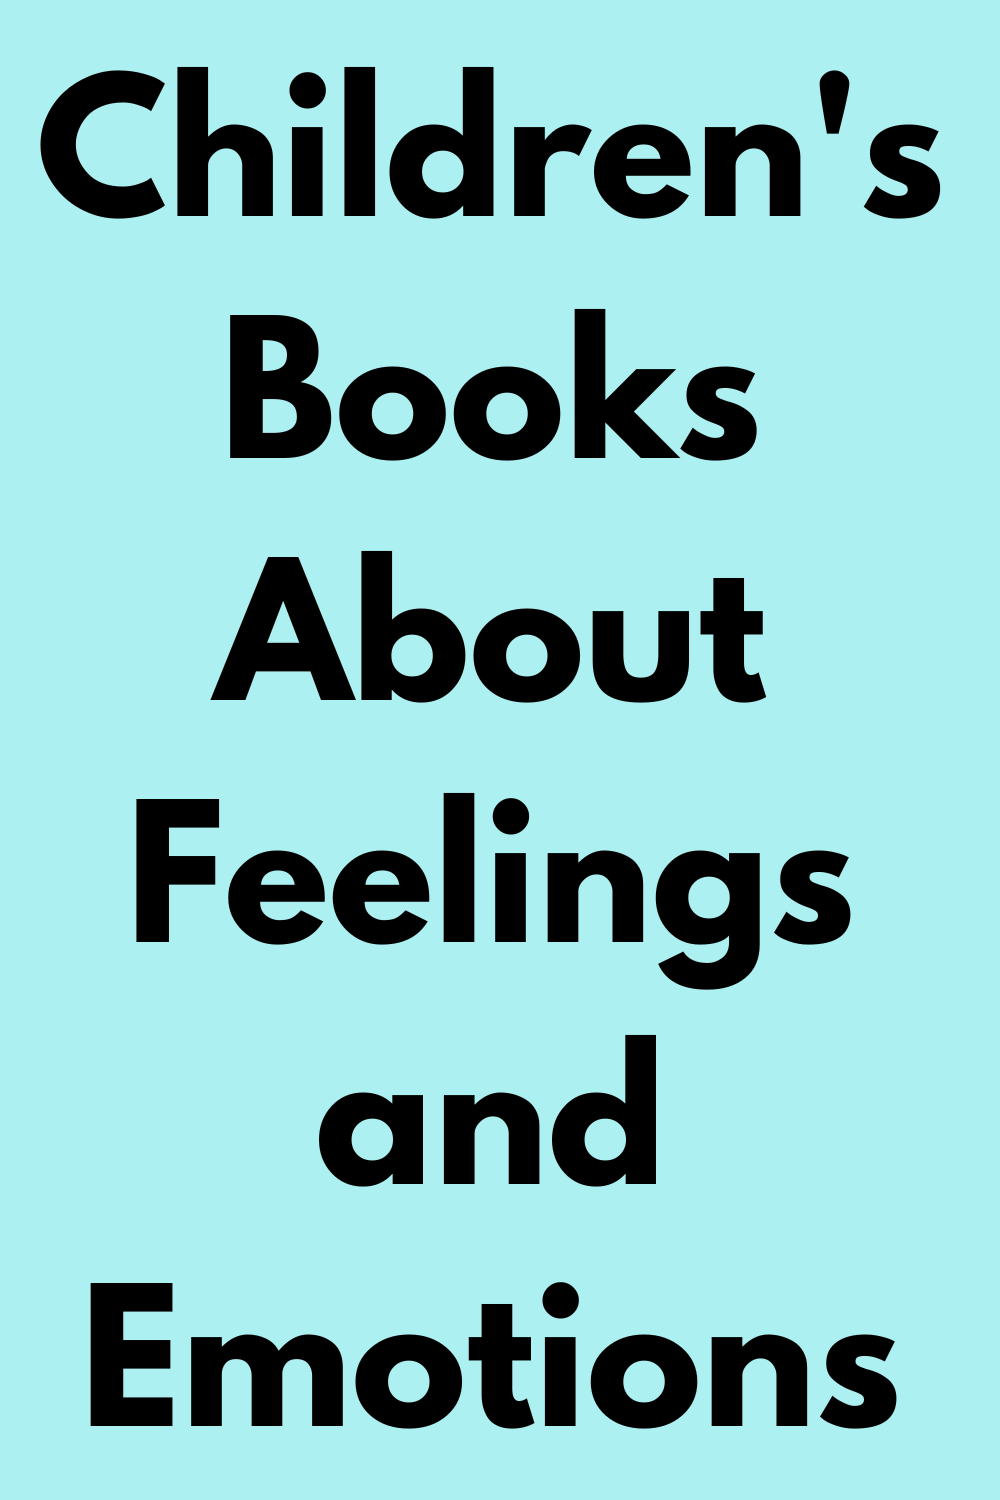 Children's Books About Feelings and Emotions